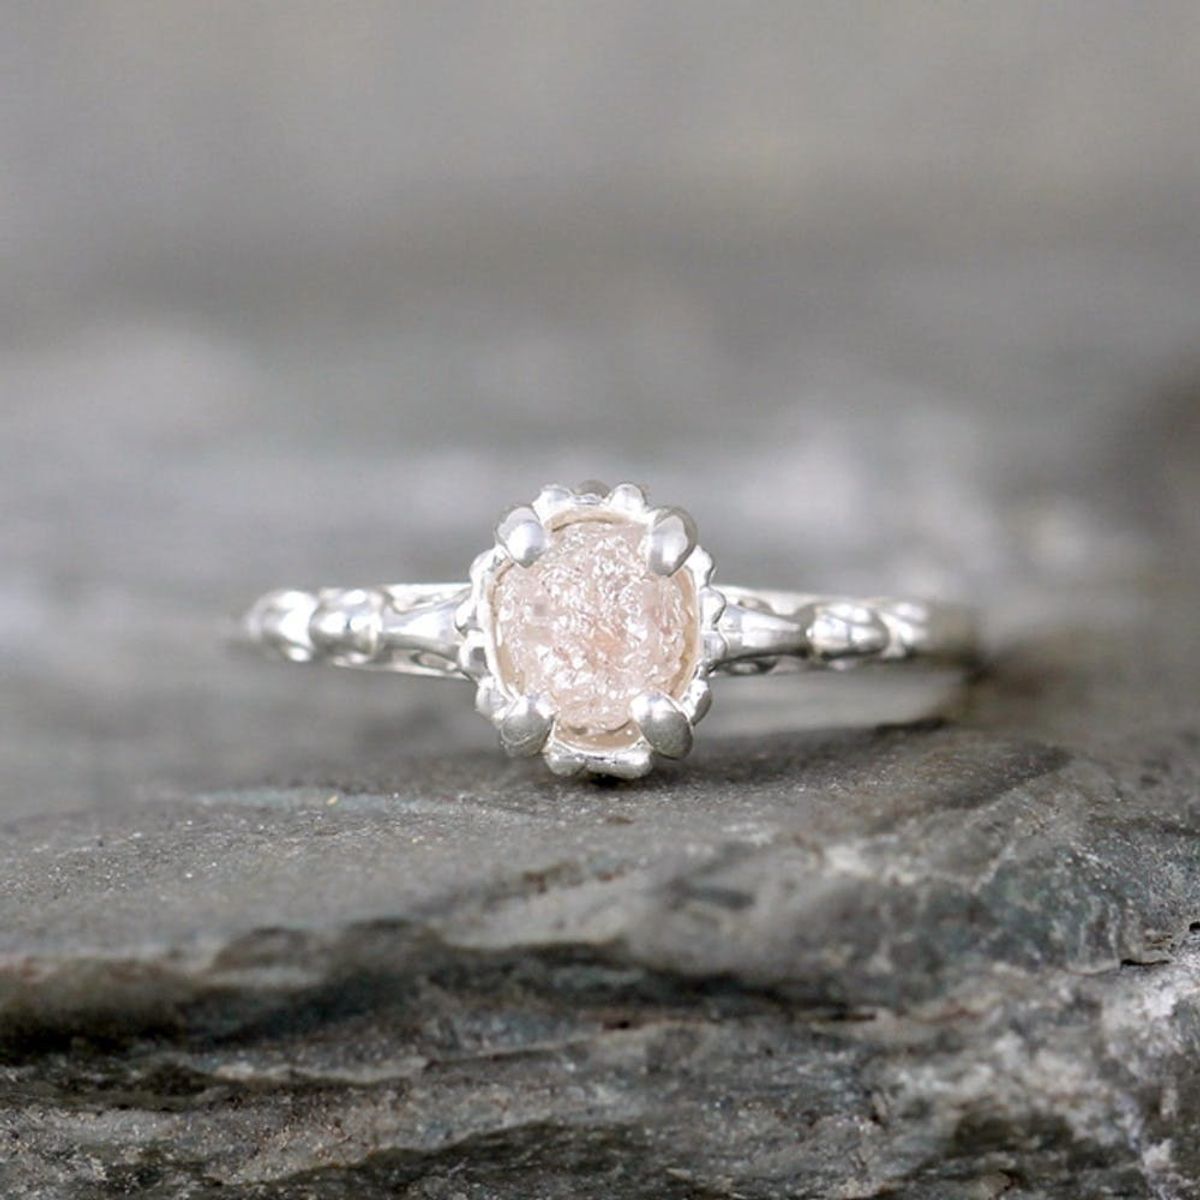 12 Raw Engagement Rings for the Non-Traditional Bride